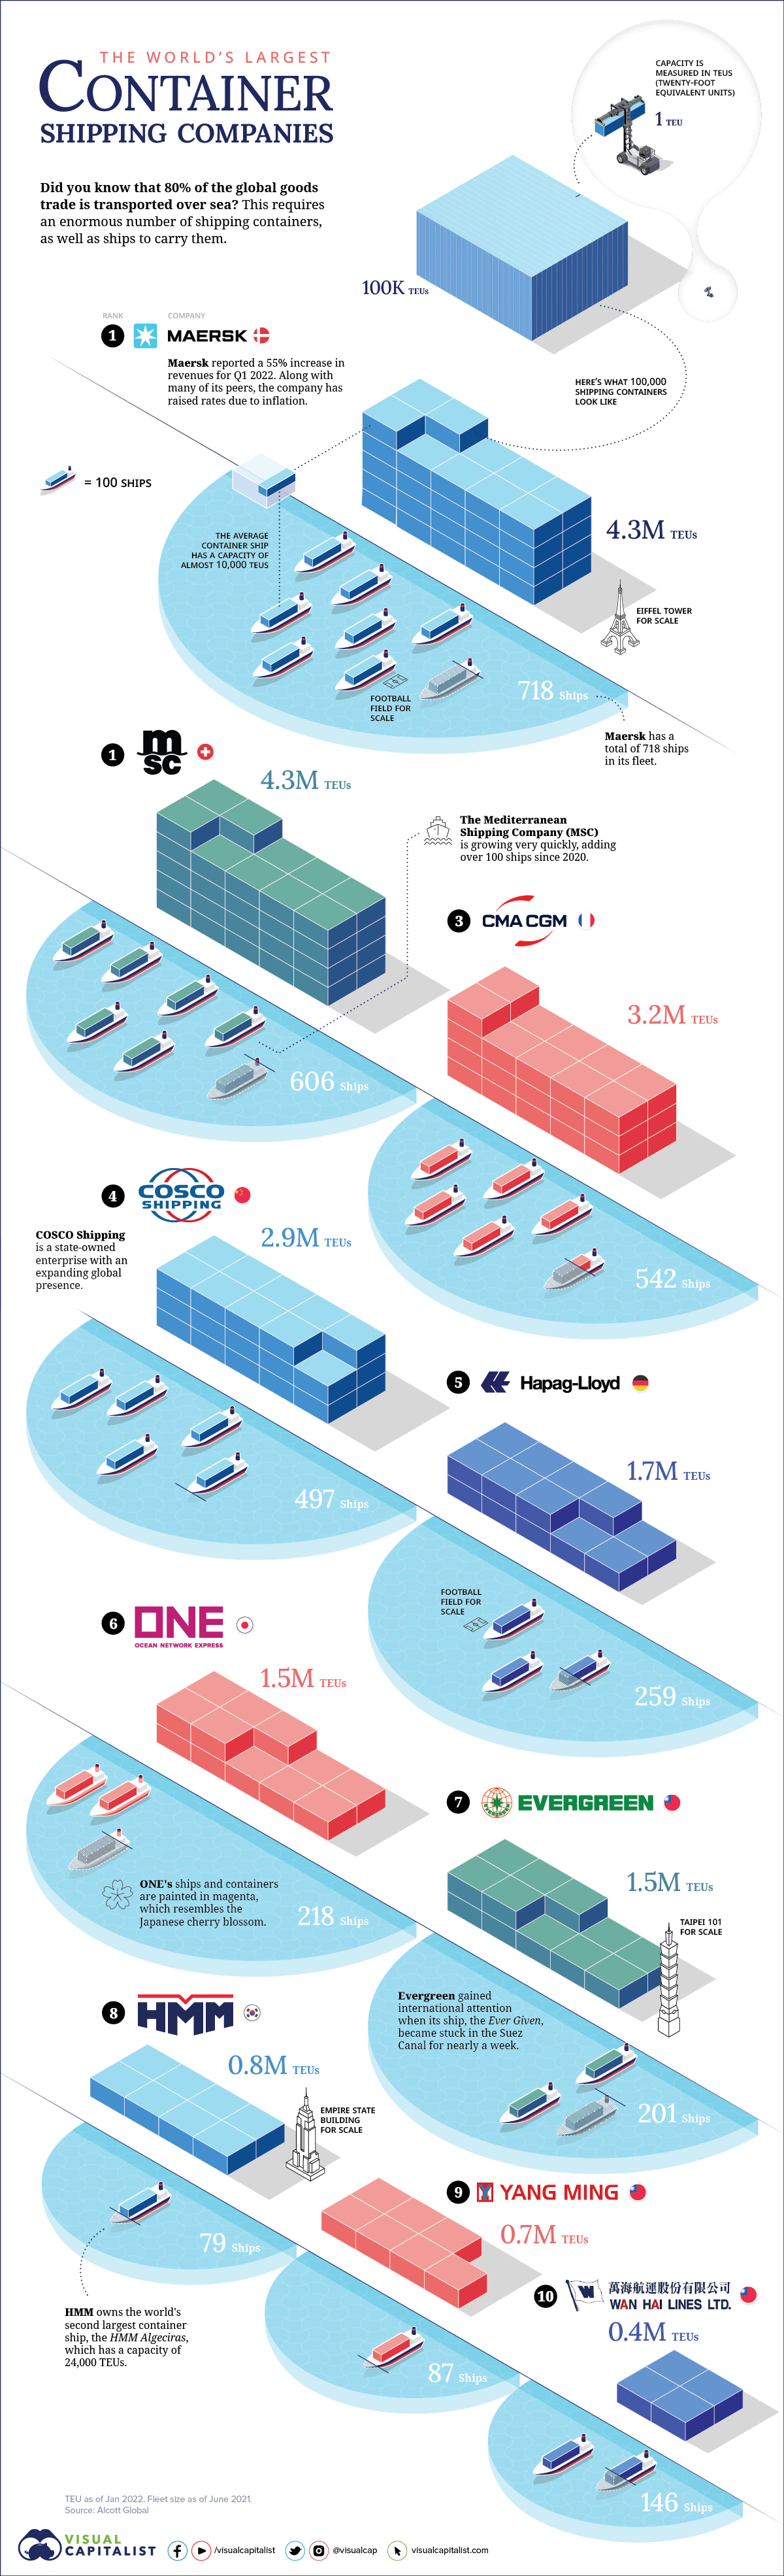 infographic showing the largest container shipping companies